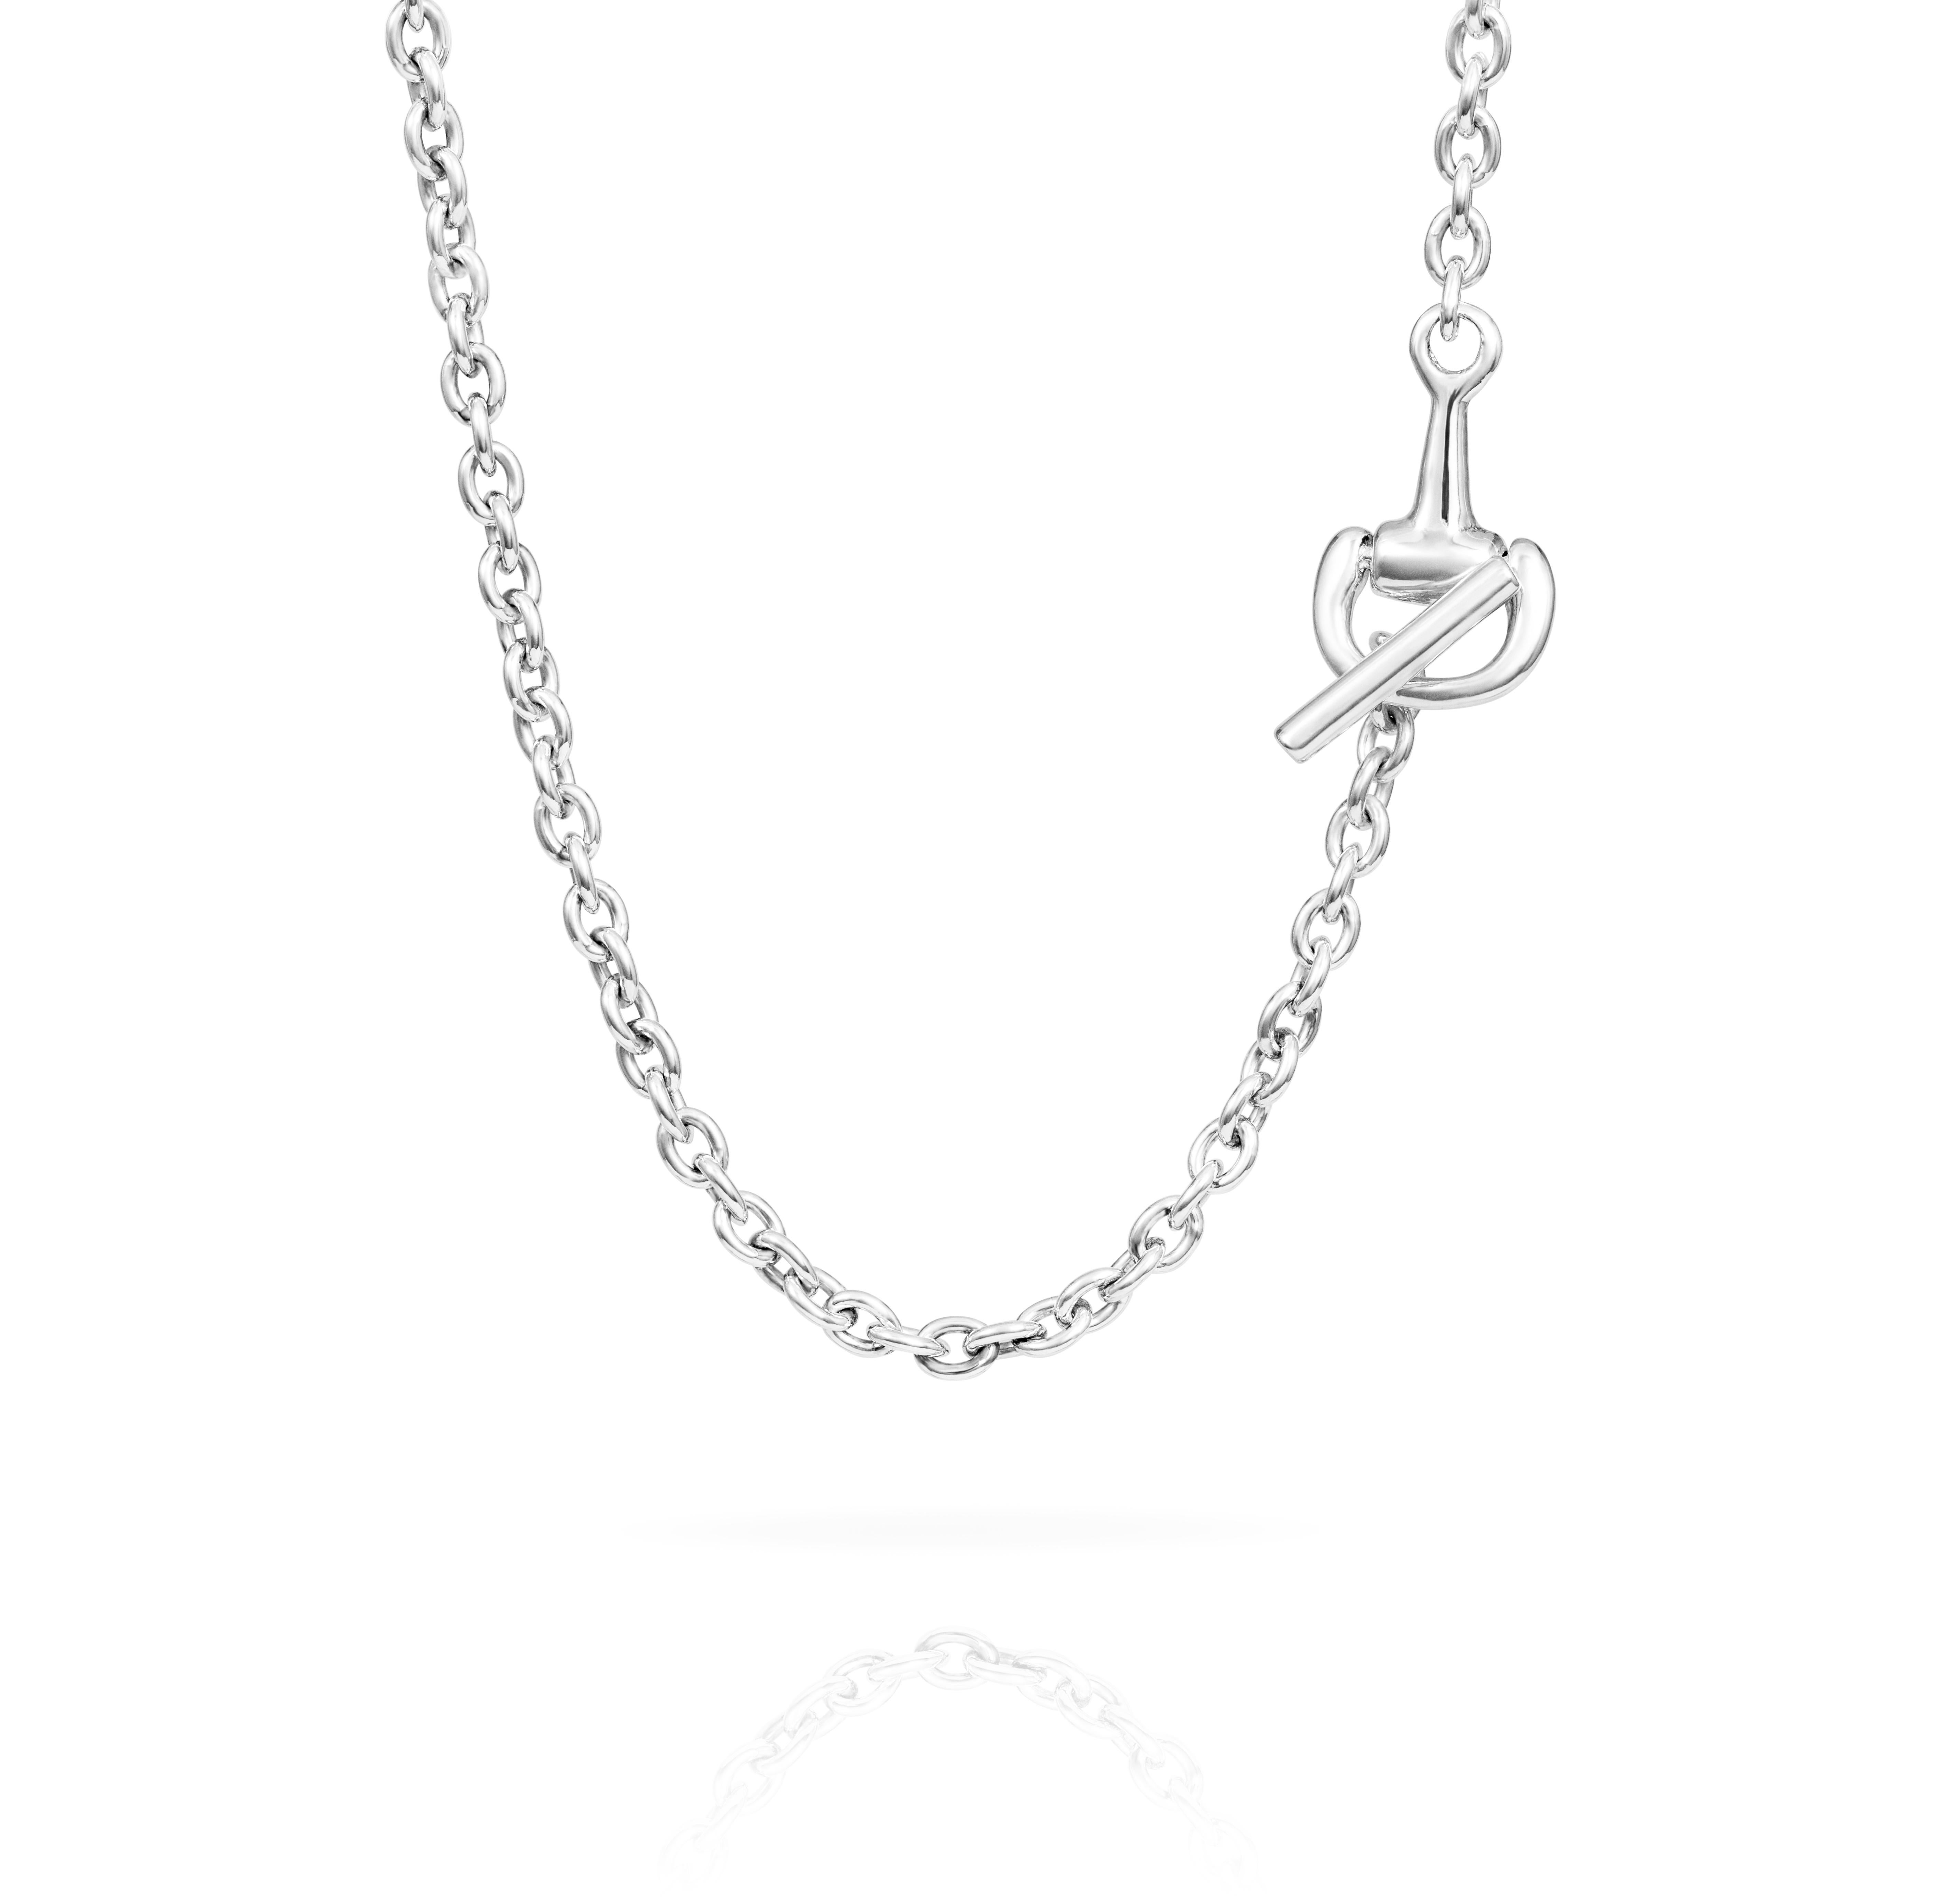 Part of the Vincent Peach Equestrian Collection, the Snaffle Bit Chain Link Necklace has a Sterling Silver Snaffle Bit Clasp on a Chunky, 17